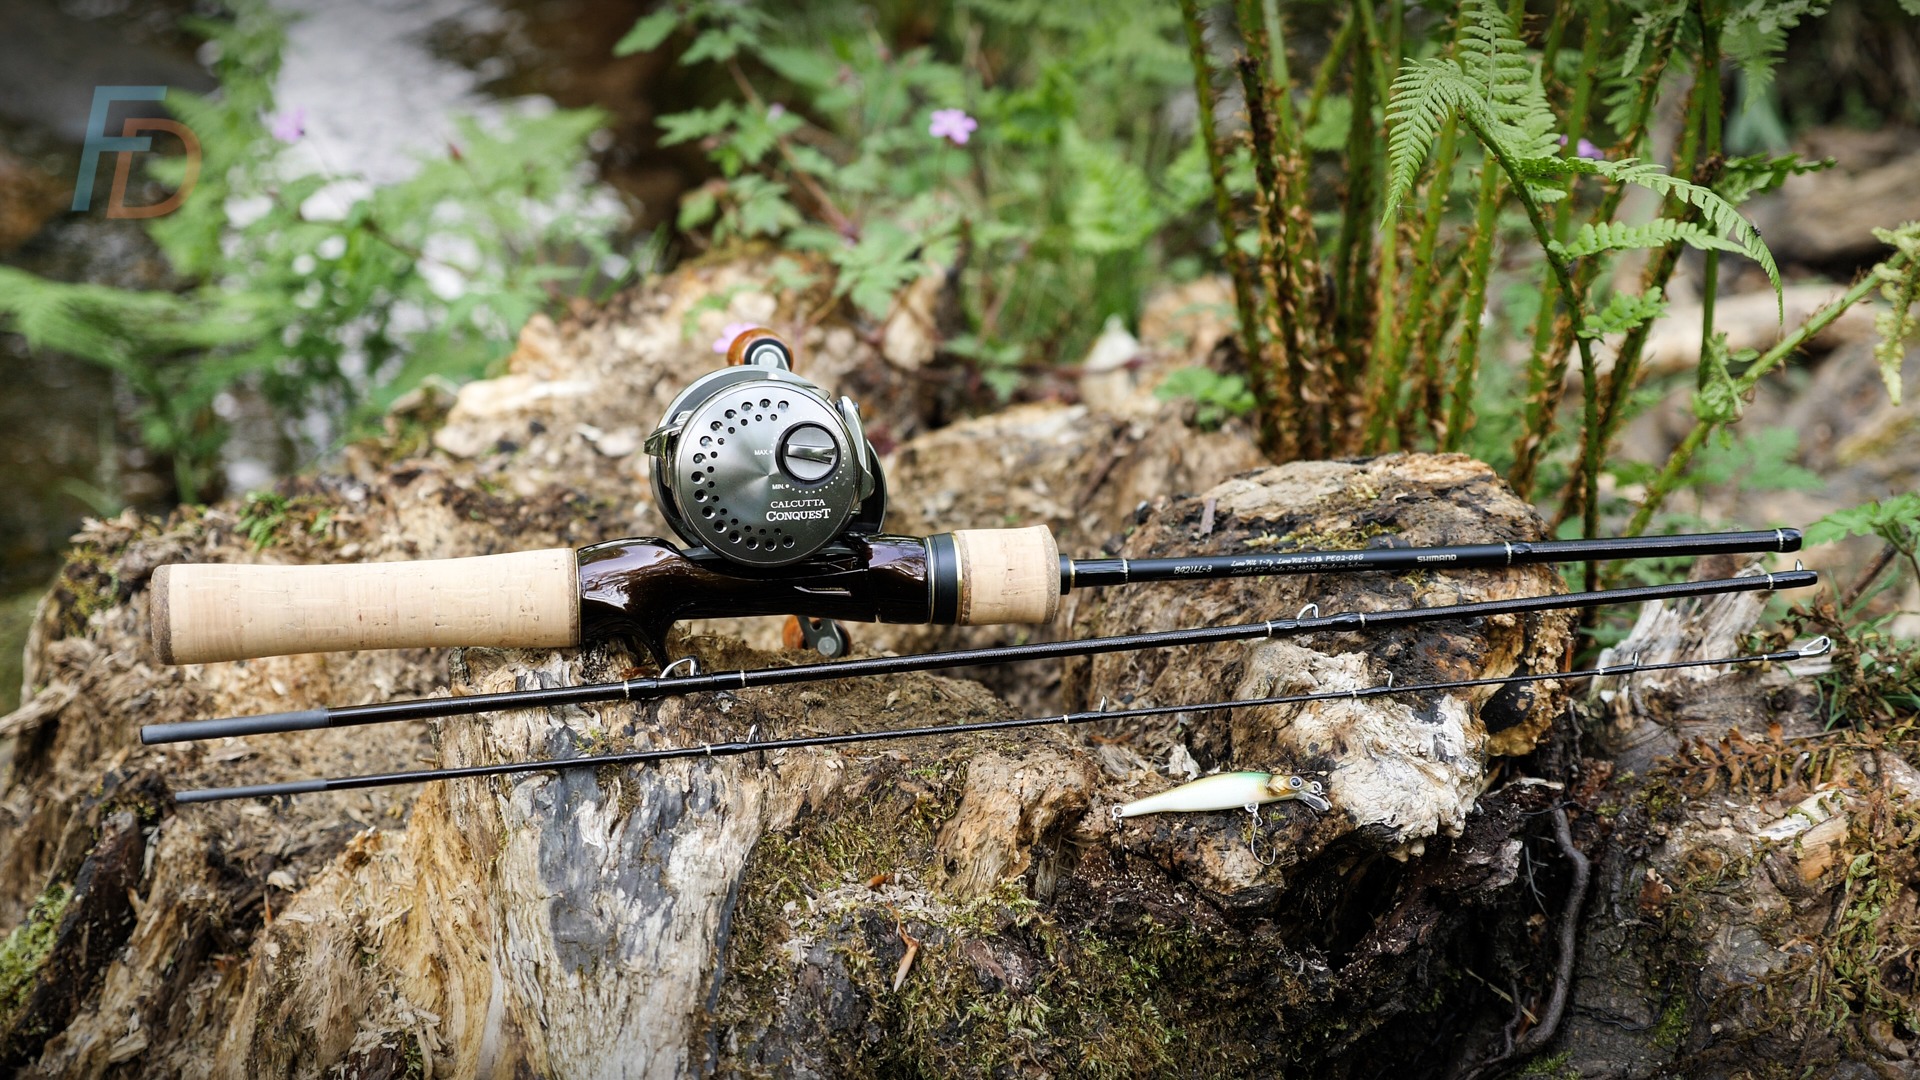 Bait Finesse Casting Rod Buyer's Guide & Features Breakdown